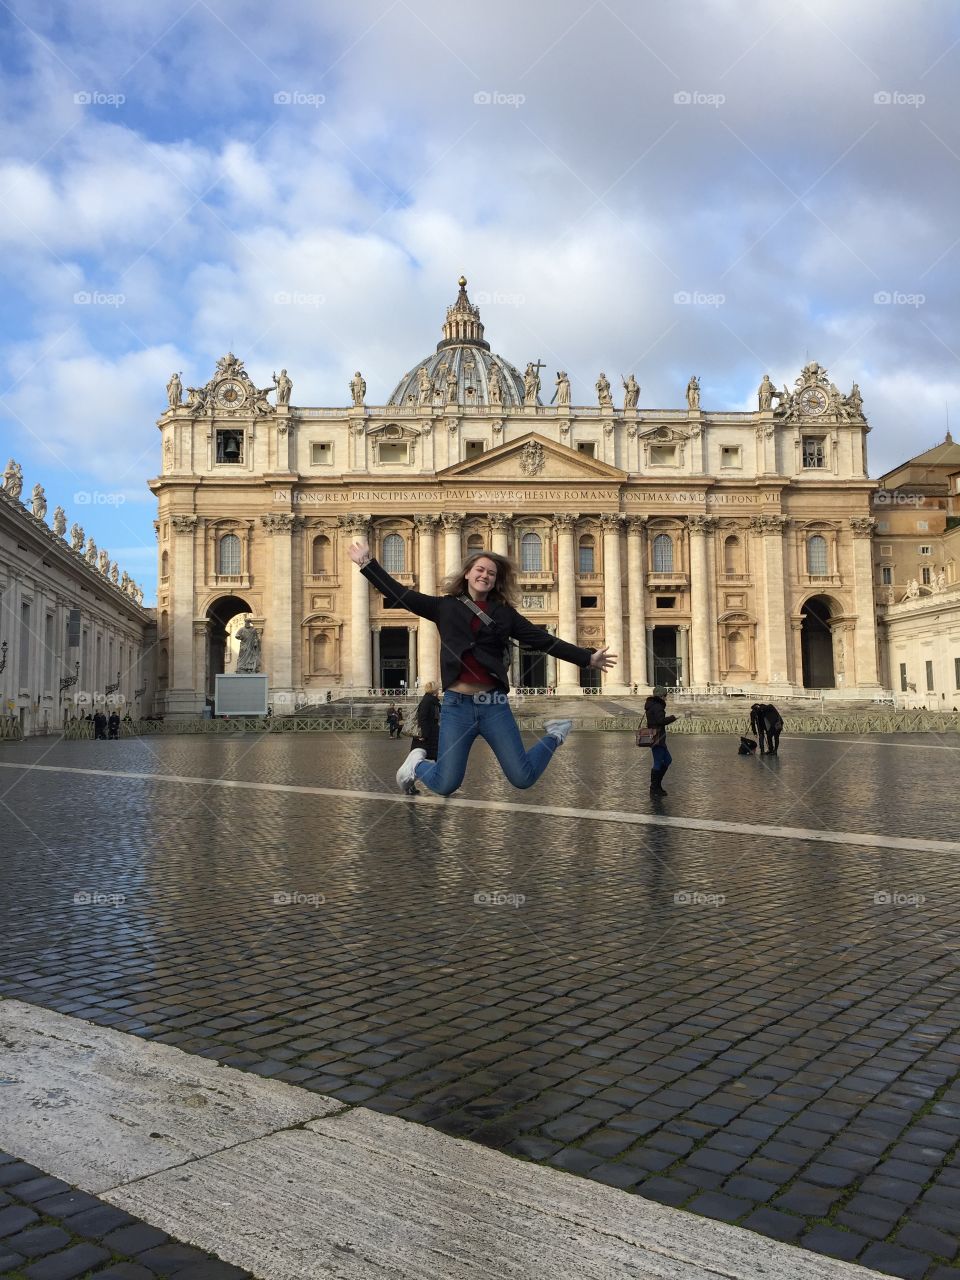 jumping for joy in front of St. Peter’s Basilica!! // Vatican City, January 2018